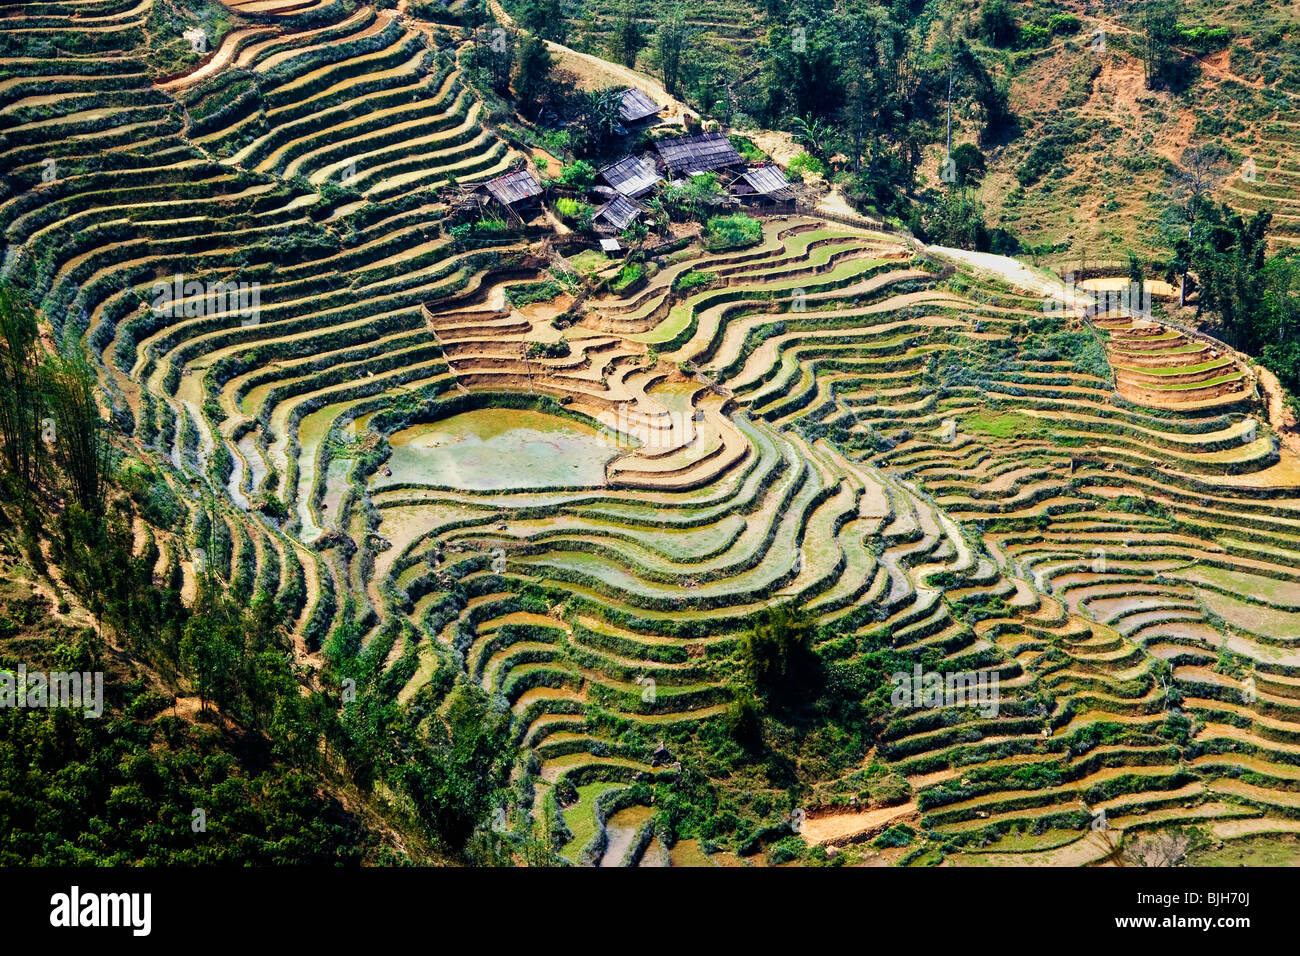 The Muong Oa Valley with traditional Terraced Paddy Fields growing Rice and Indigo, near Sapa, Northern Vietnam, Southeast Asia Stock Photo